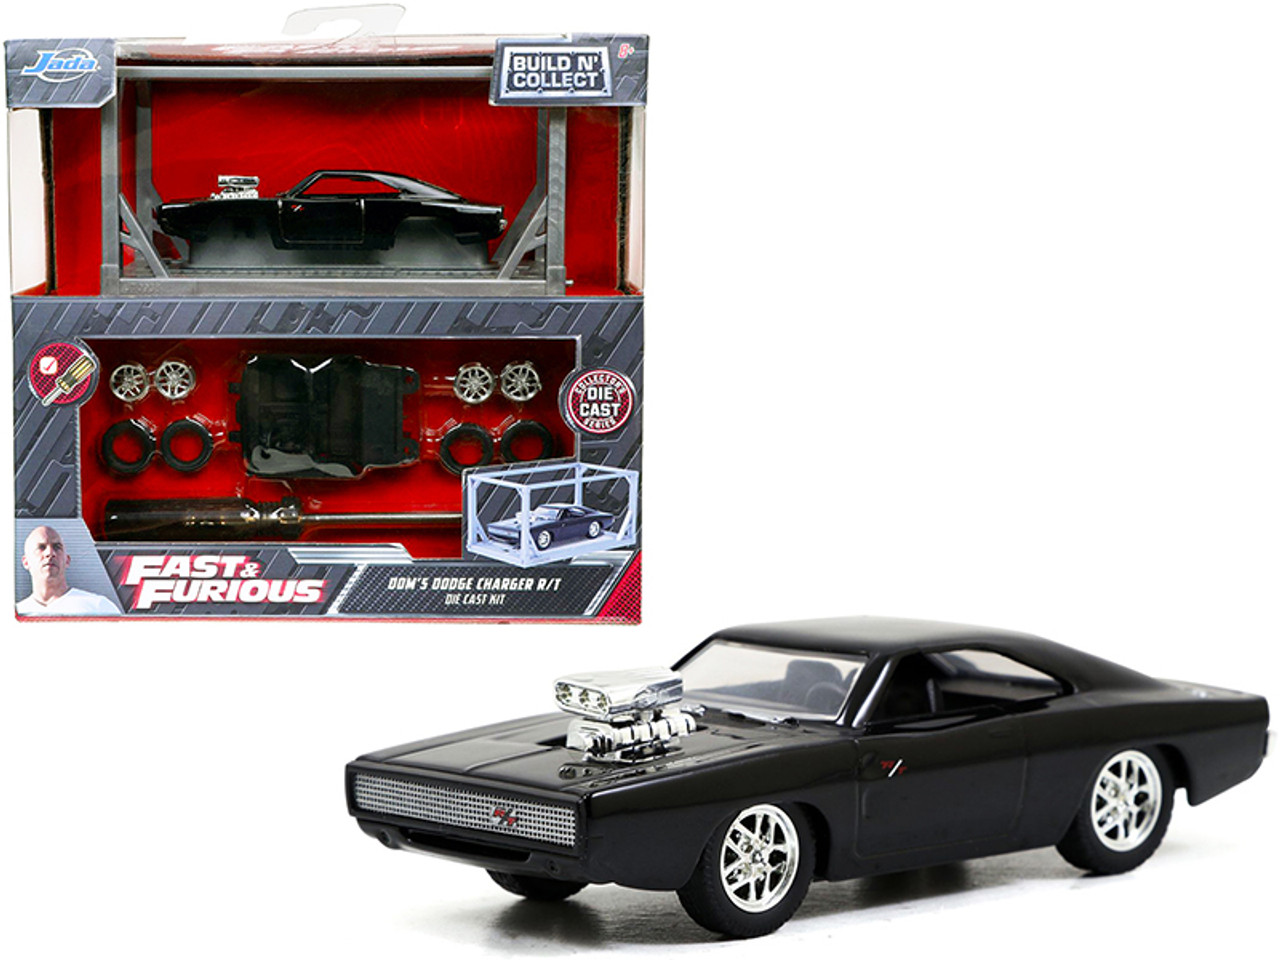 Model Kit Dom's Dodge Charger R/T Black "Fast & Furious" Movie "Build N' Collect" 1/55 Diecast Model Car by Jada